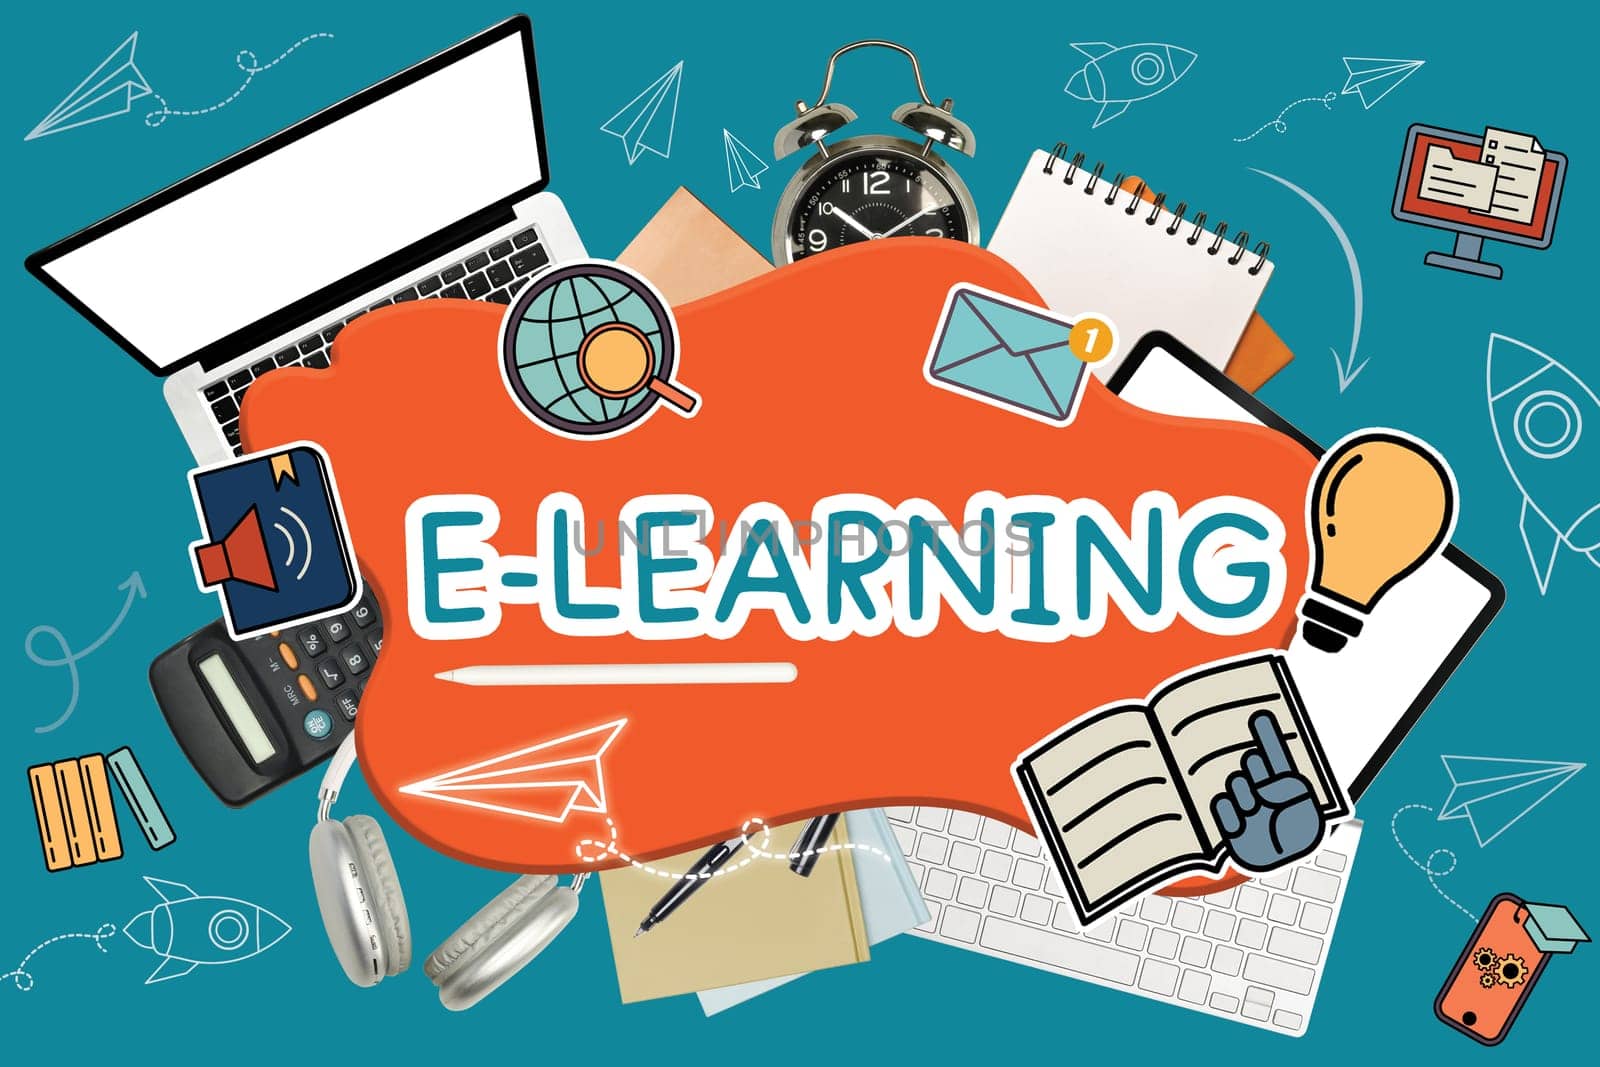 Word e-learning surrounded by various school supplies and laptop on blue background.